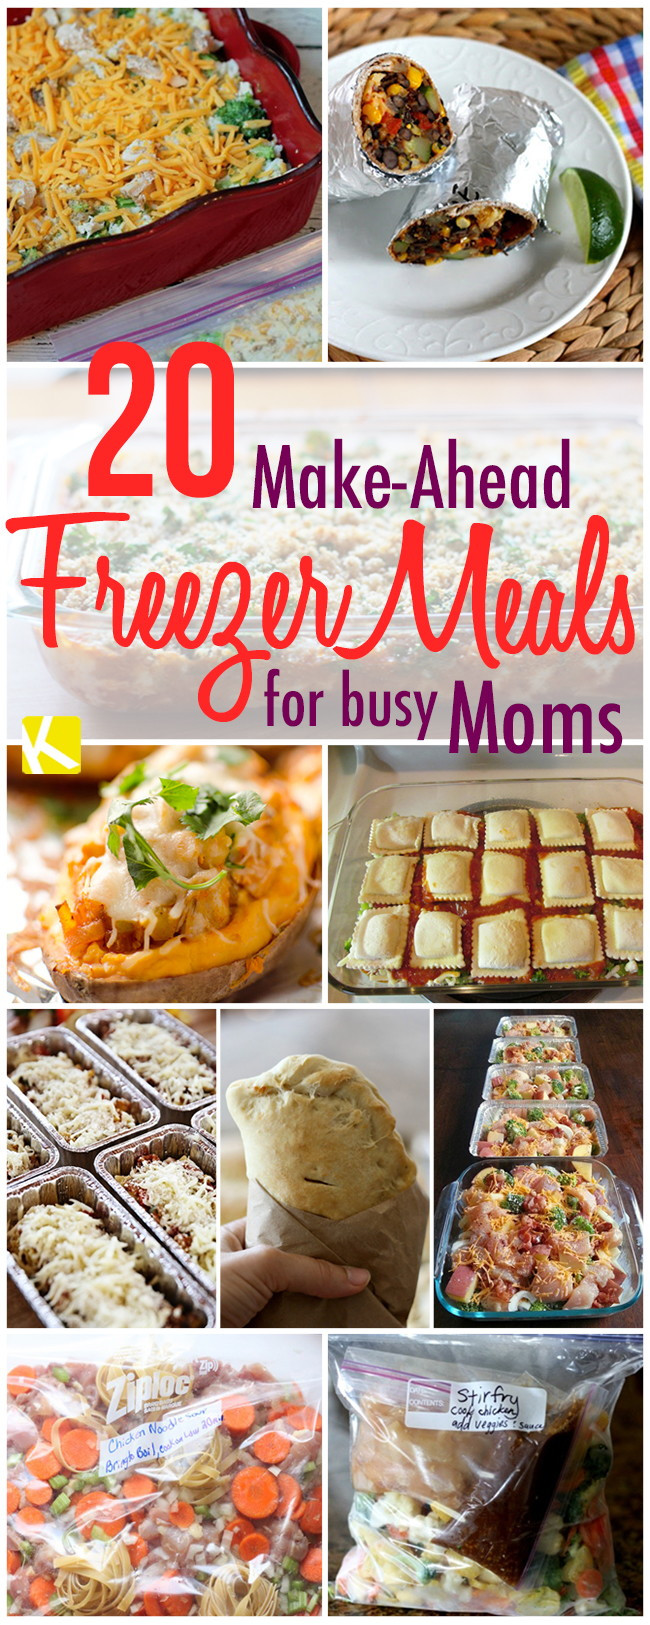 Make Ahead And Freeze Dinners
 20 Make Ahead Freezer Dinners for Busy Moms The Krazy